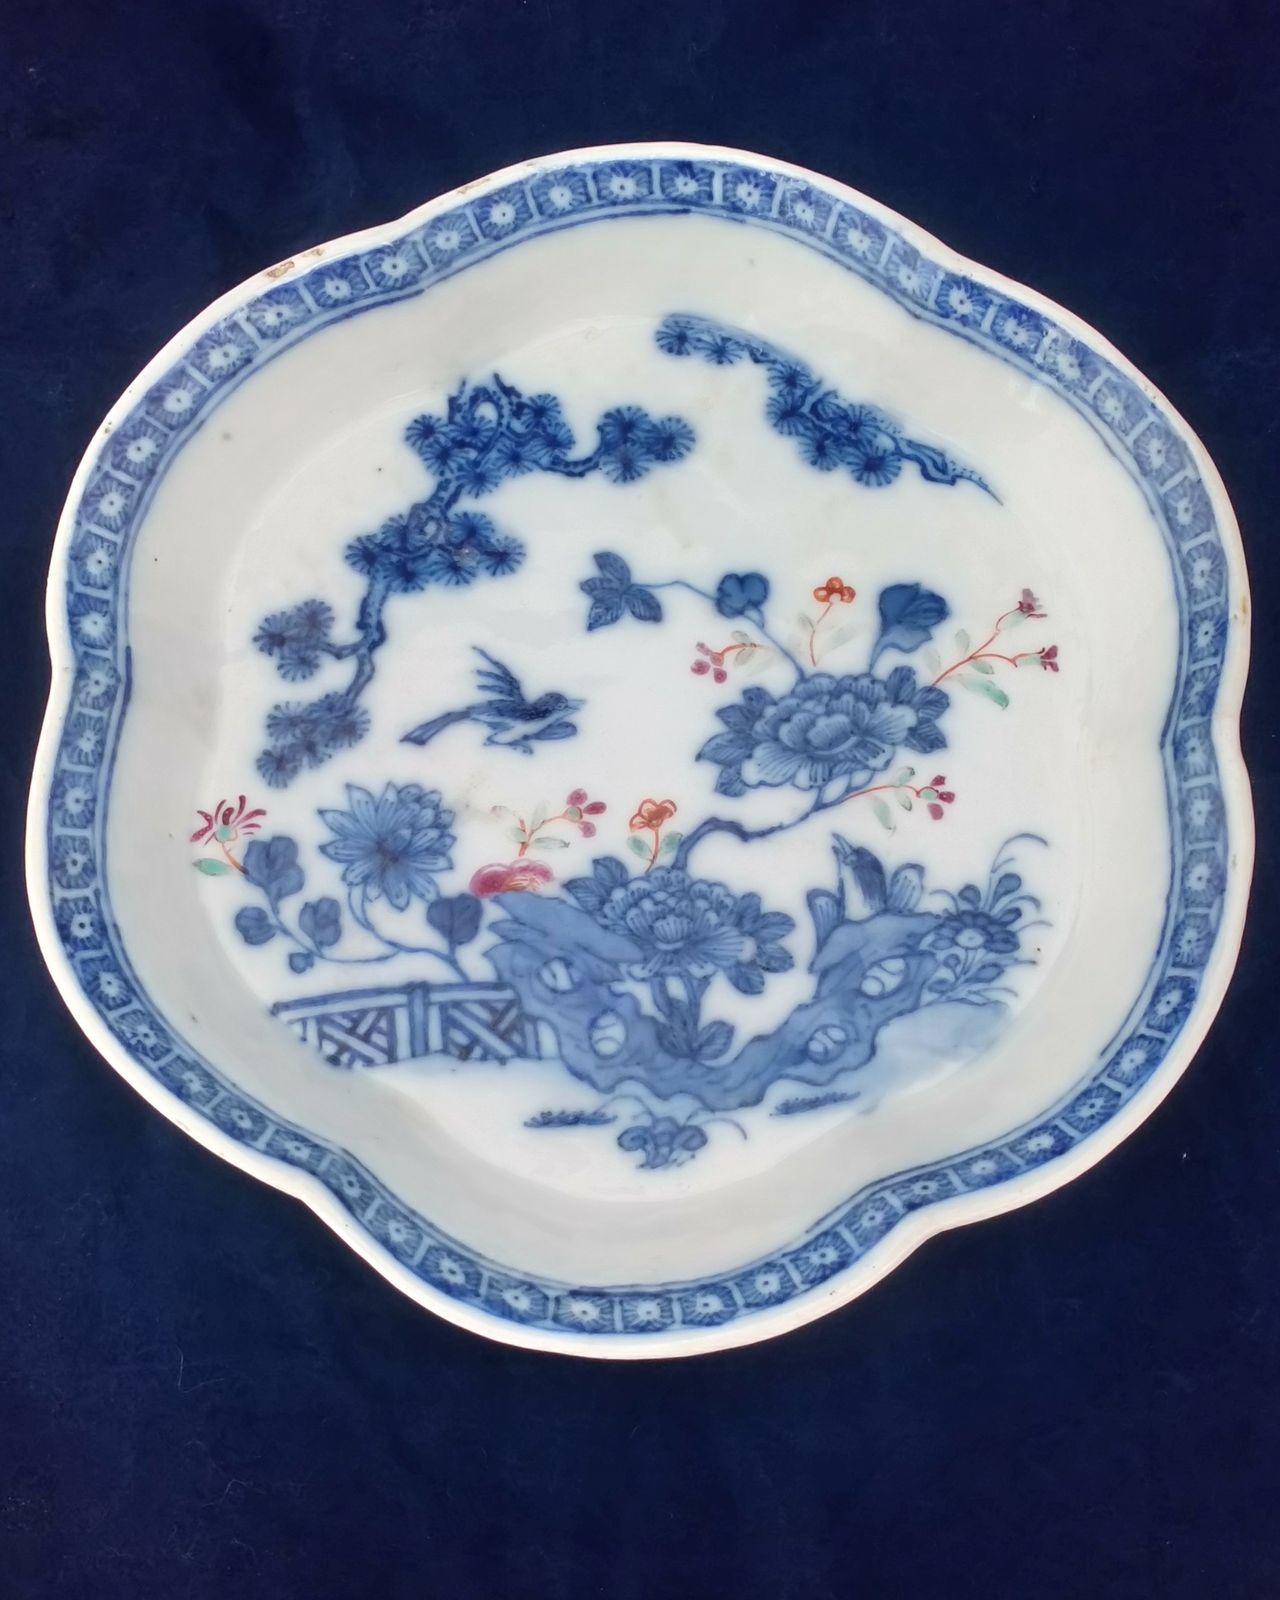 Antique Chinese porcelain lobed hexagonal shaped teapot stand hand painted in underglaze blue with clobbered enamel flowers made in the reign of the Emperor Qianlong 乾隆 in the Qing dynasty 清代 circa 1750.